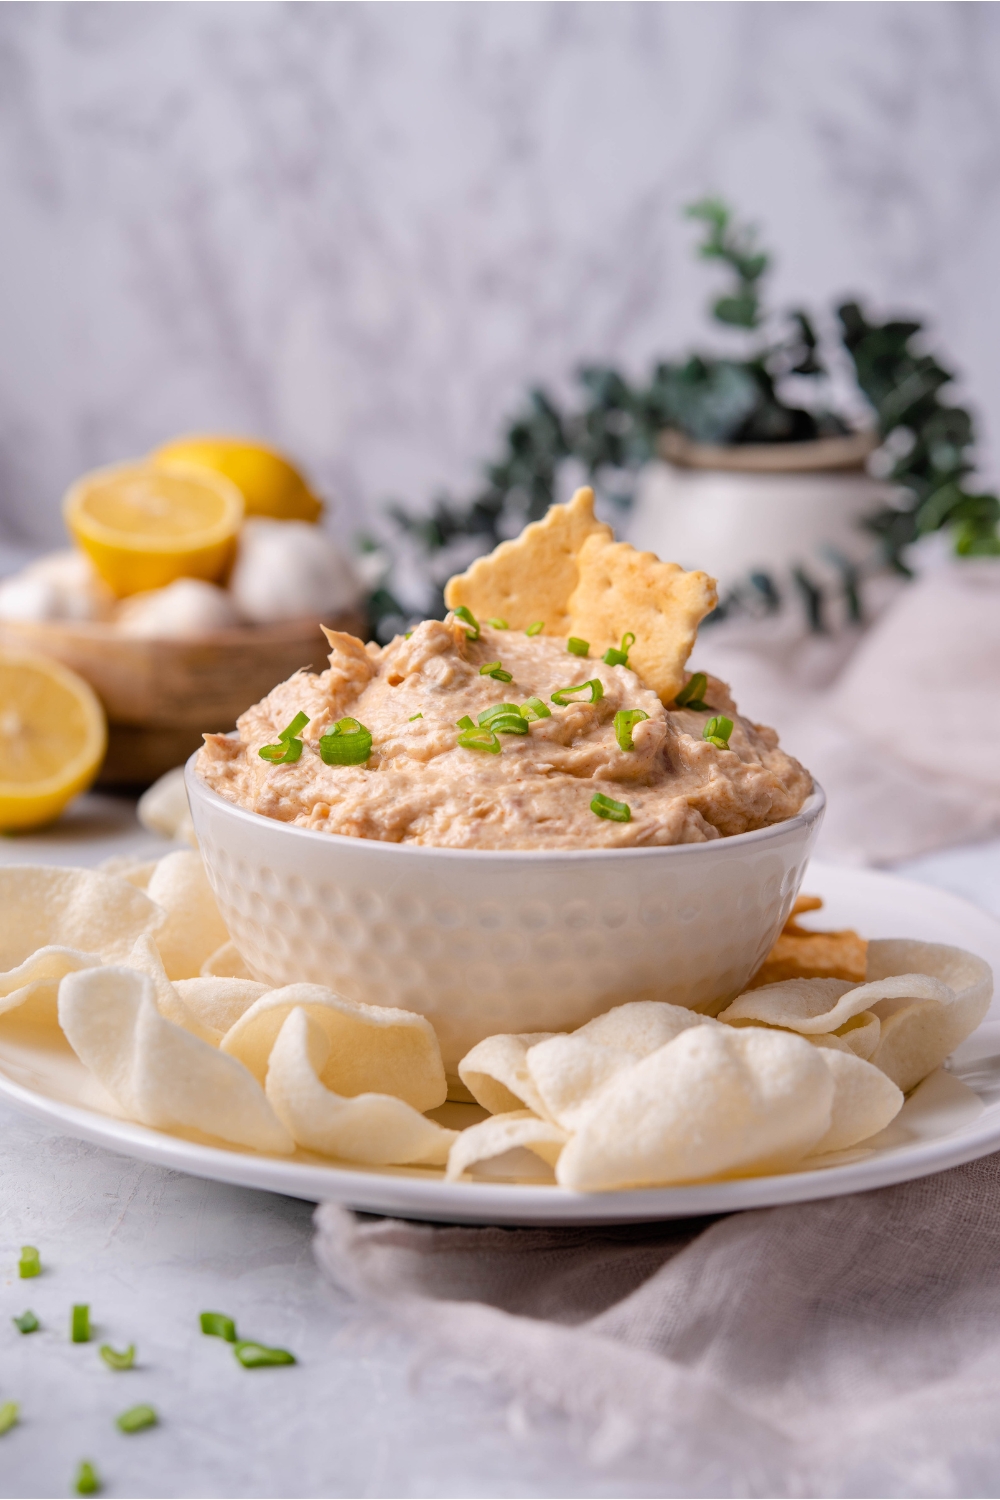 Smoked tuna dip in a white serving bowl garnished with chopped green onions and two crackers stuck in the dip. The bowl of dip is on a white plate and surrounded by chips.